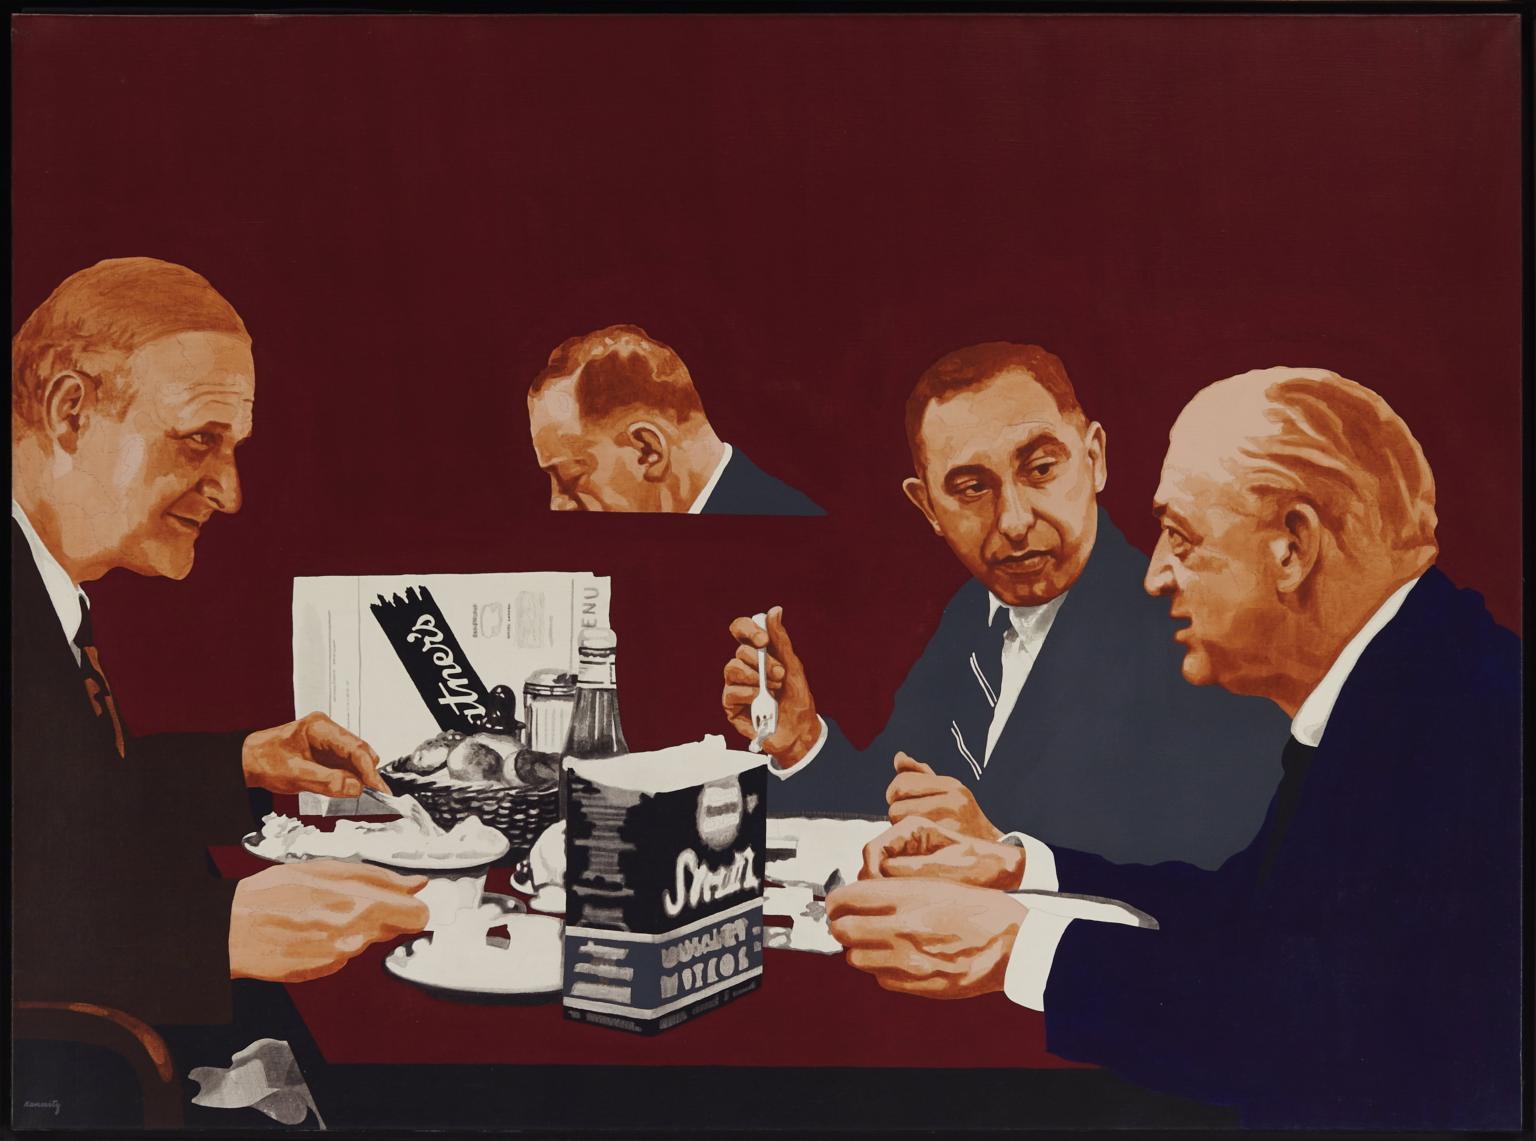 Painting featuring three men in suits sitting at a table in a restaurant eating and gesticulating.